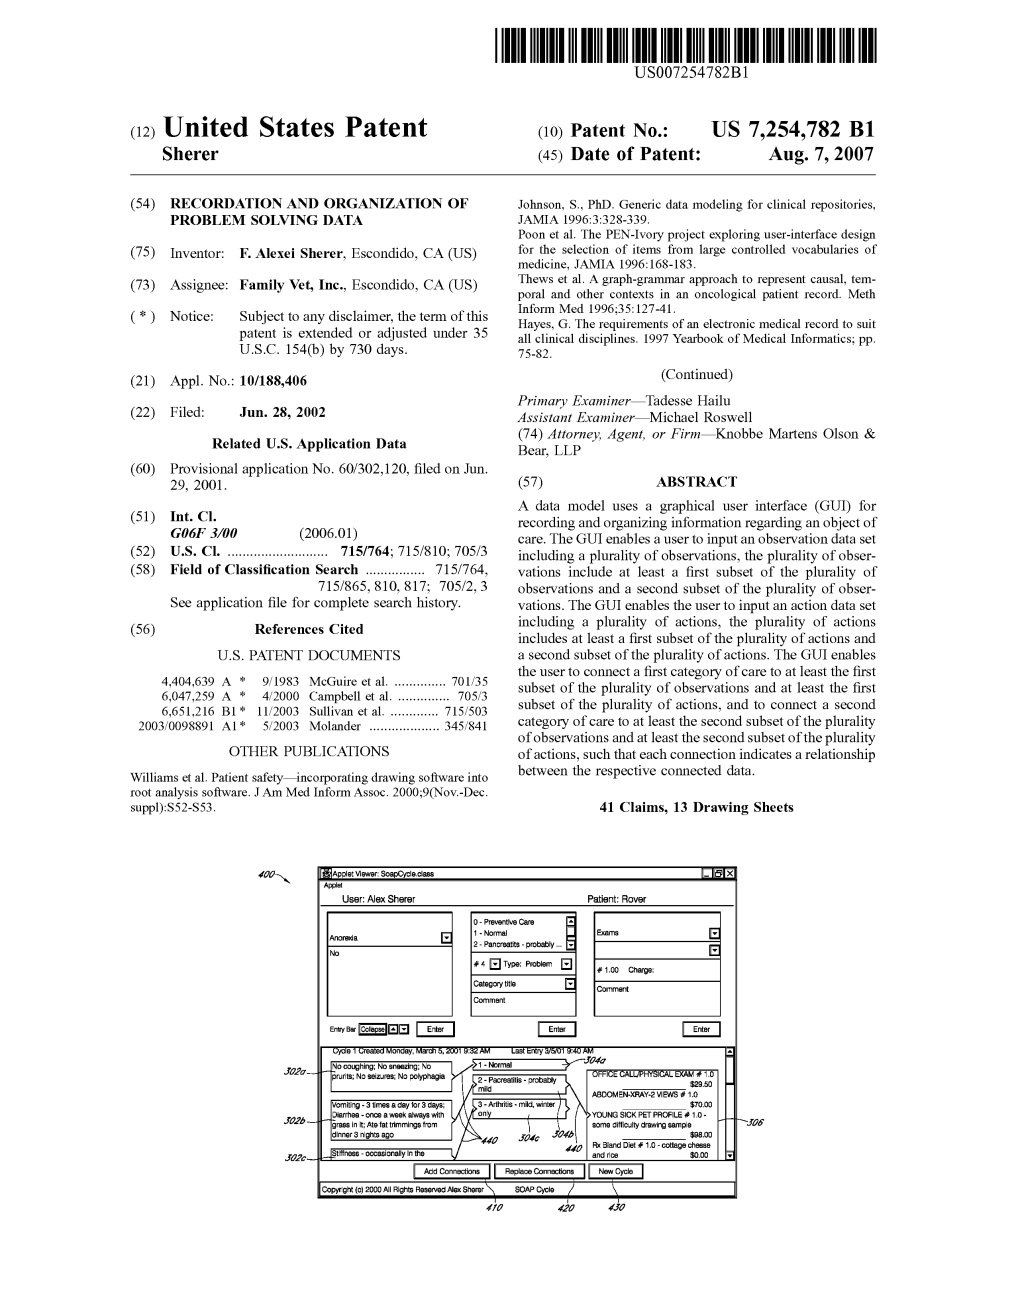 (12) United States Patent (10) Patent No.: US 7.254,782 B1 Sherer (45) Date of Patent: Aug